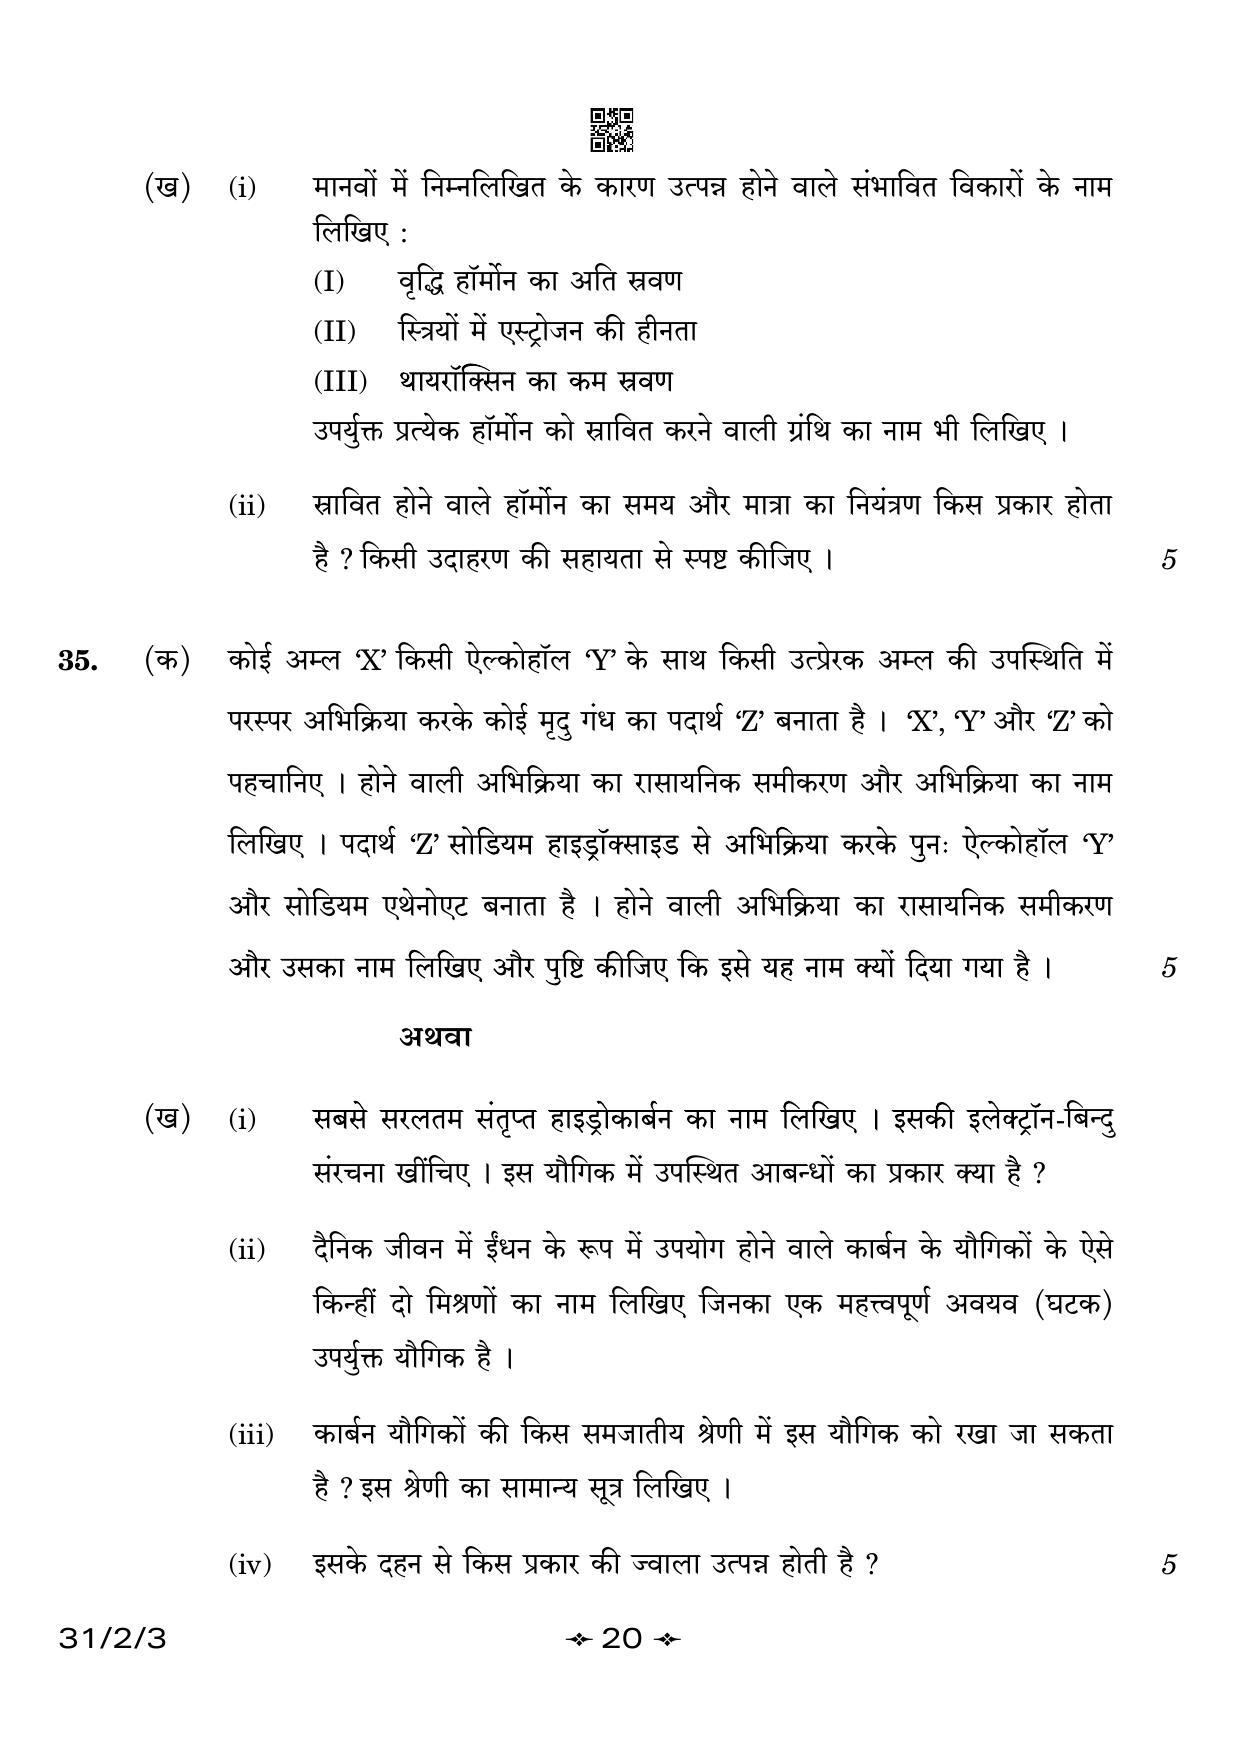 CBSE Class 10 31-2-3 Science 2023 Question Paper - Page 20